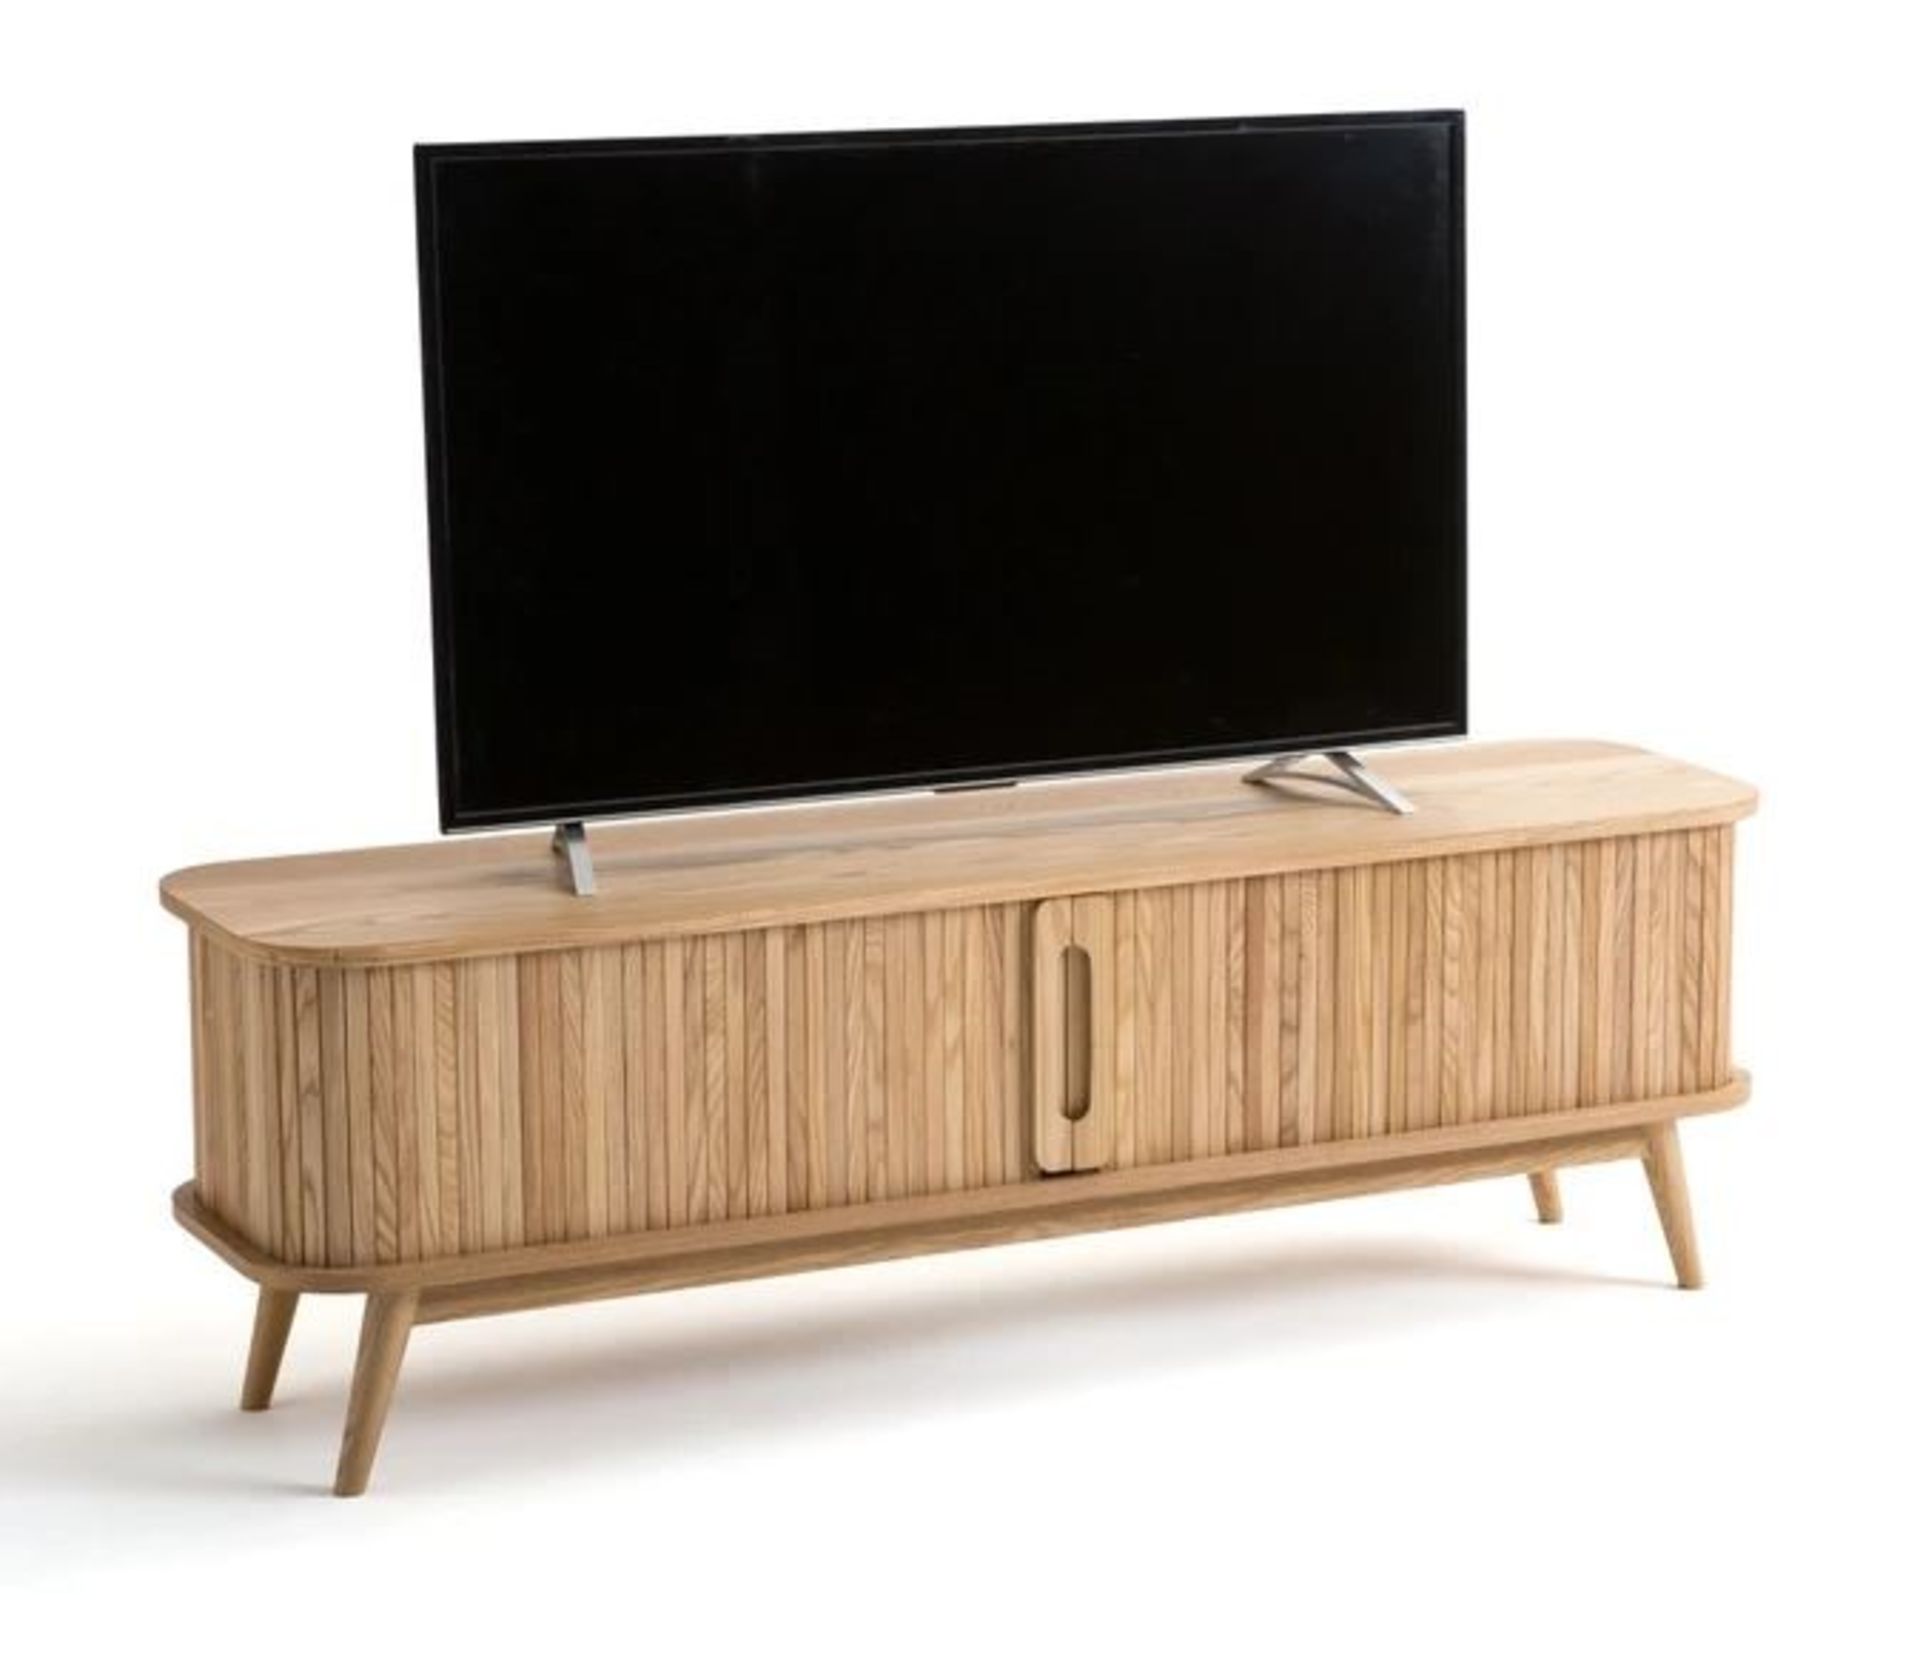 LA REDOUTE WAPONG TV STAND WITH SLIDING DOORS